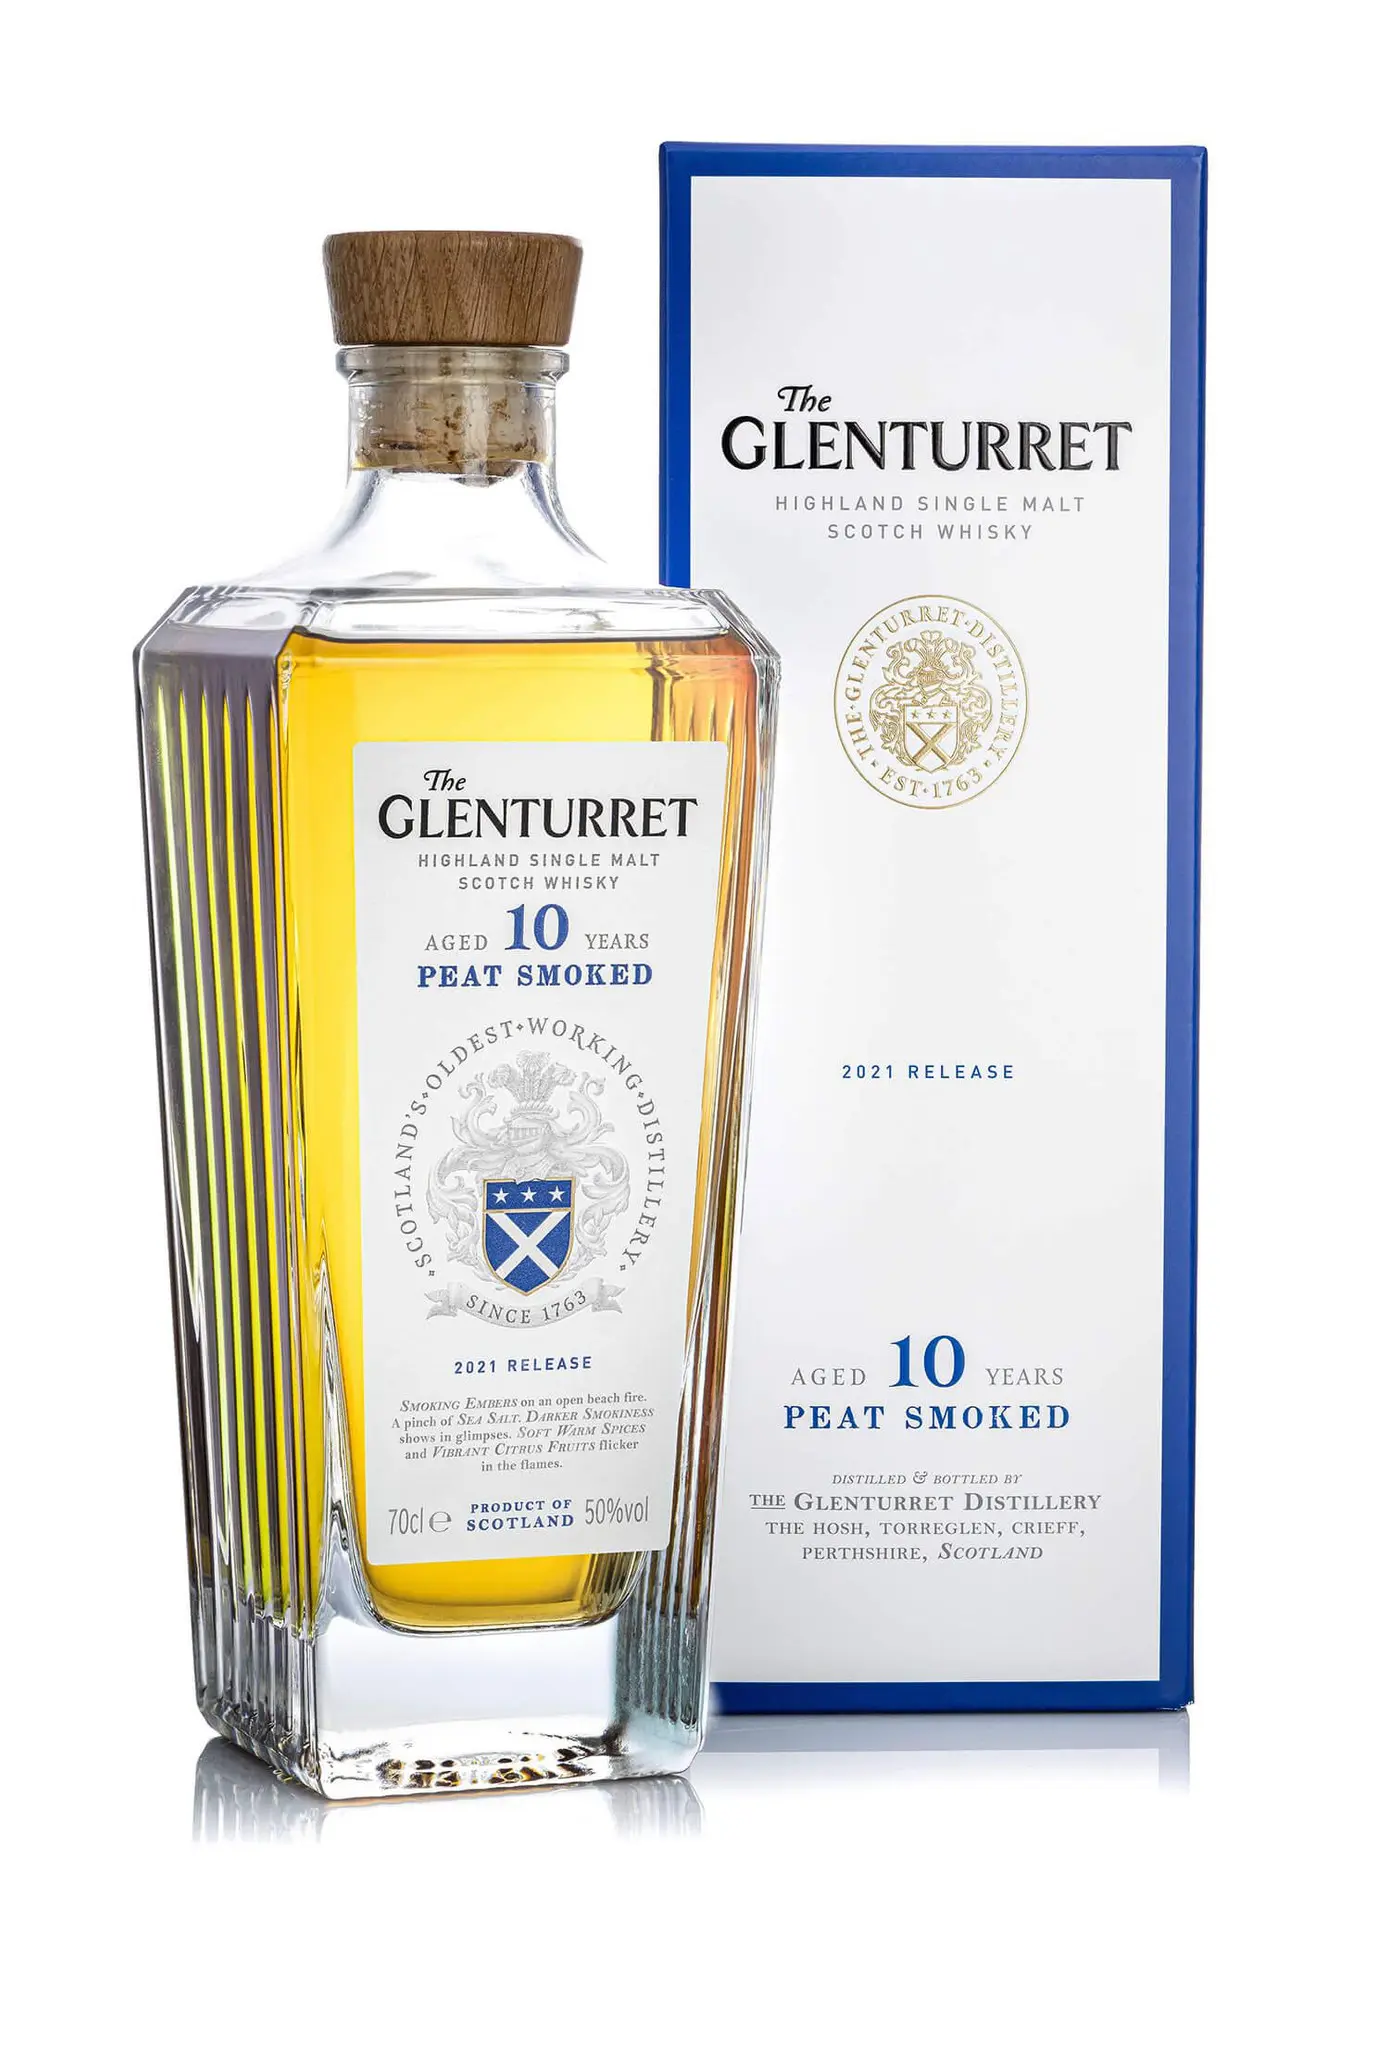 glenturret 10 year old peat smoked - What is the oldest distillery in Scotland